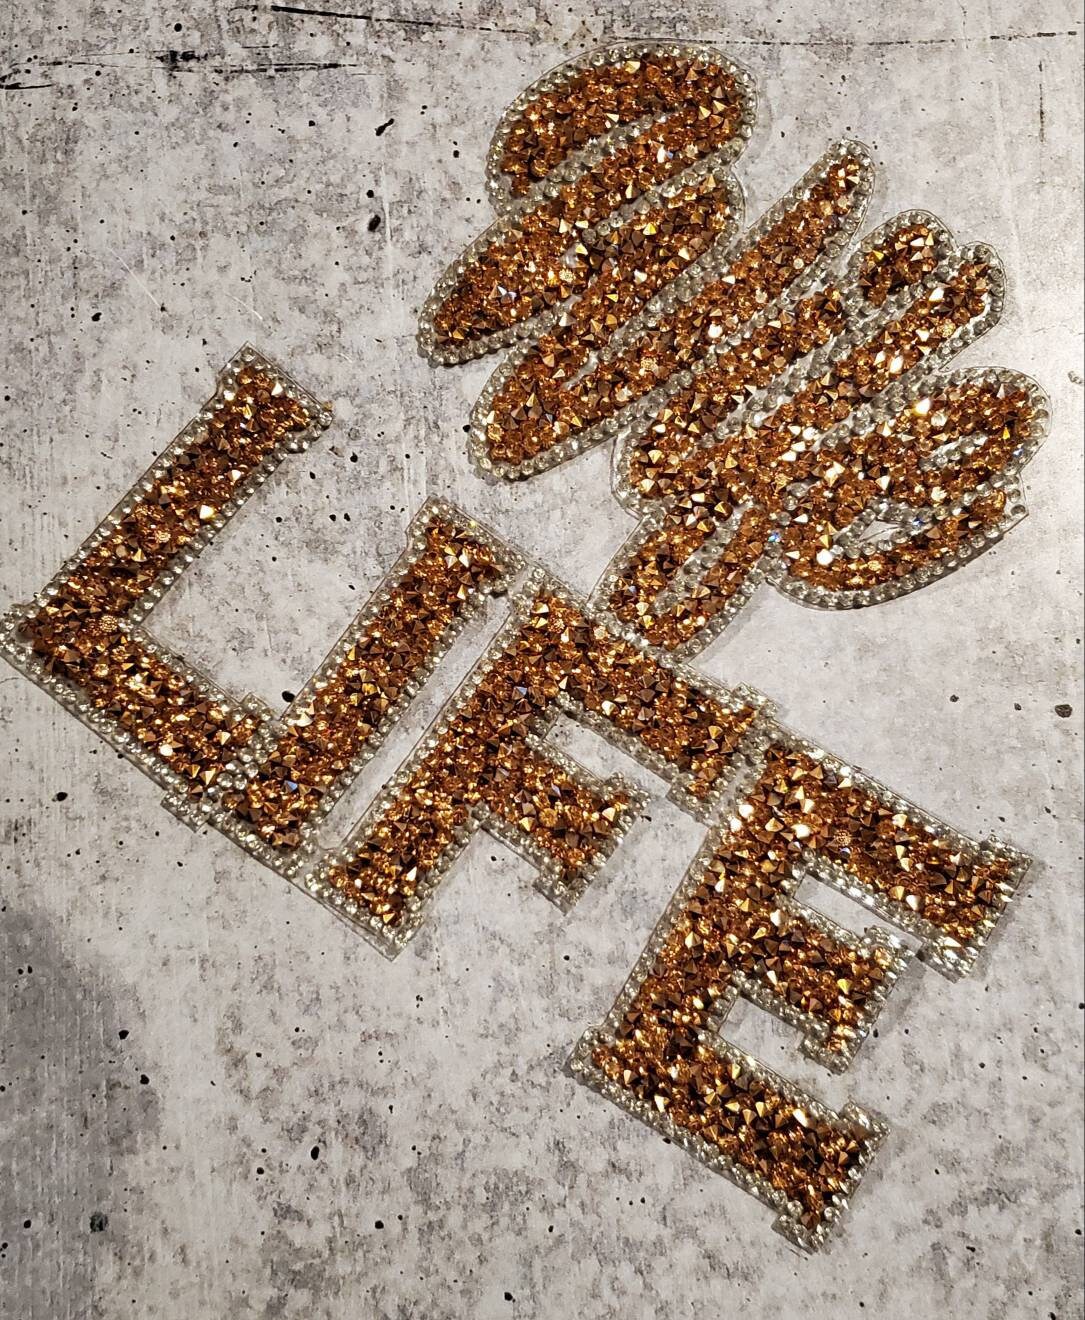 NEW Arrival, Rose Gold Crushed "Wife Life" Rhinestone Patch with Adhesive, Rhinestone Applique, Size 7.5", Czech Rhinestones, Bride to be